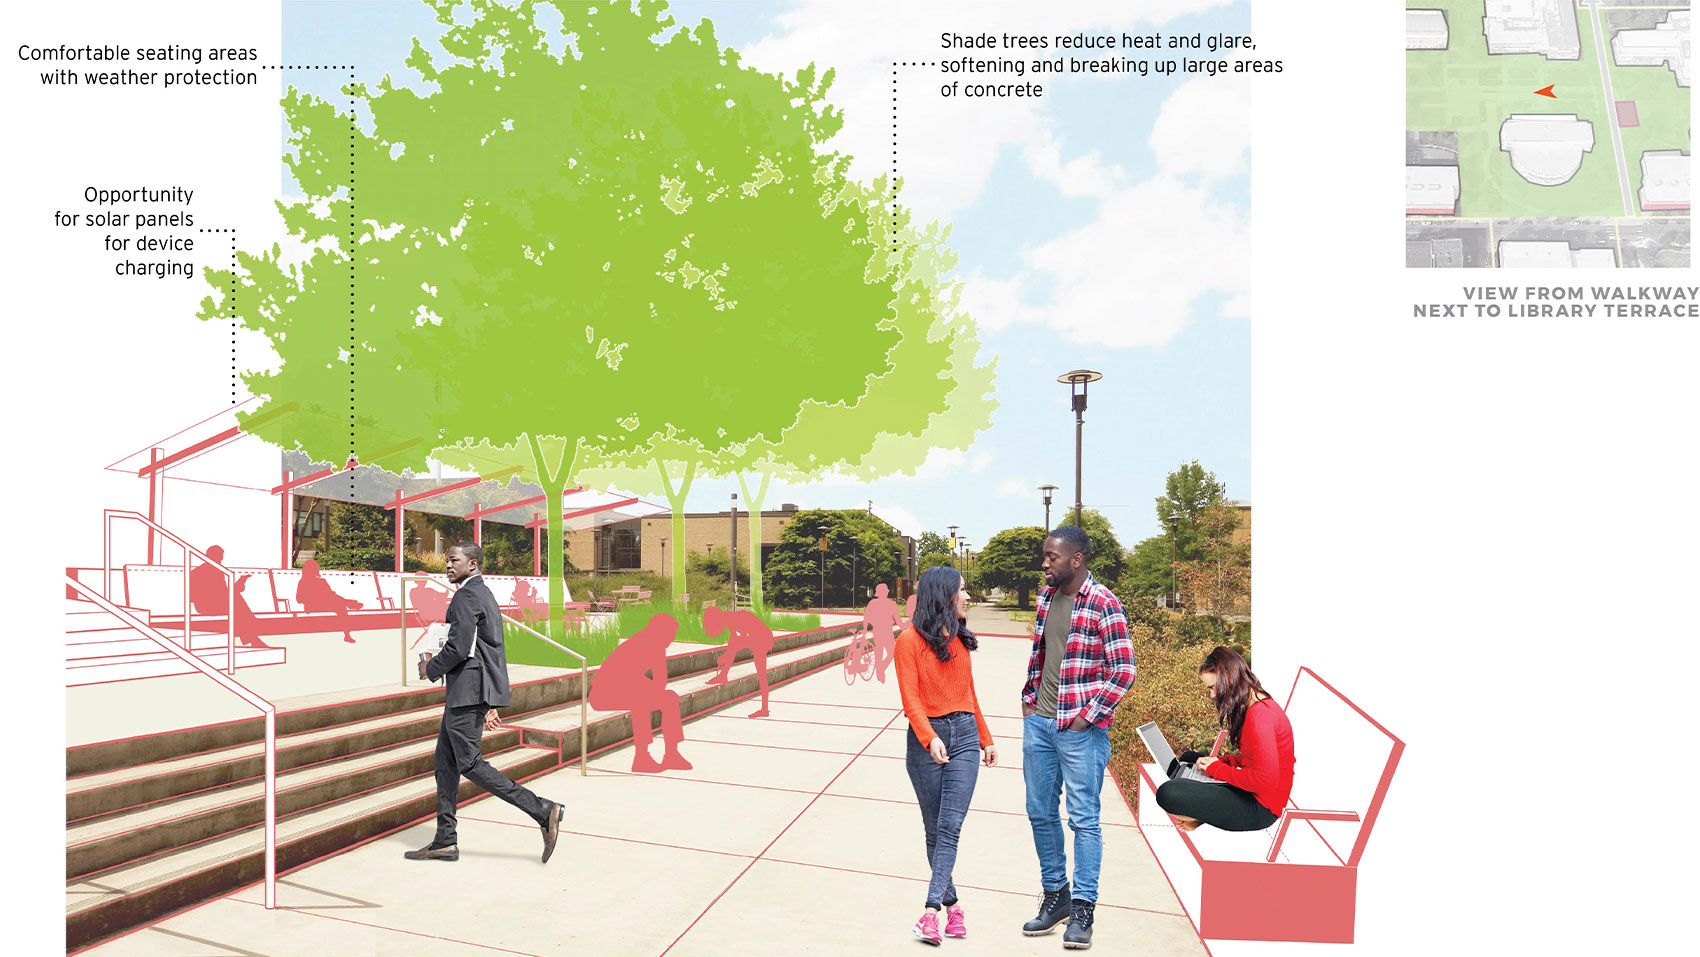 Conceptual Graphic|Artist’s rendering of the same view. The landscaped area at right includes a bench with a student seated using a laptop. Two students are standing in the pathway talking. A student is shown walking toward the steps to the library. On the terrace area, three trees are planted in a row at the top of the second step with planted areas around them. The trees are labeled, “Shade trees reduce heat and glare, softening and breaking up large areas of concrete”. At the back of the terrace, a long bench with a roof structure covering it is shown with silhouettes of students studying and relaxing. The long, covered bench on the terrace is labeled, “Comfortable seating areas with weather protection”. The roof structure is labeled, “Opportunity for solar panels for device charging”. A key map at the top right shows an orange arrow pointing west between the library and Terrell Hall, labeled “view from walkway next to library terrace”.